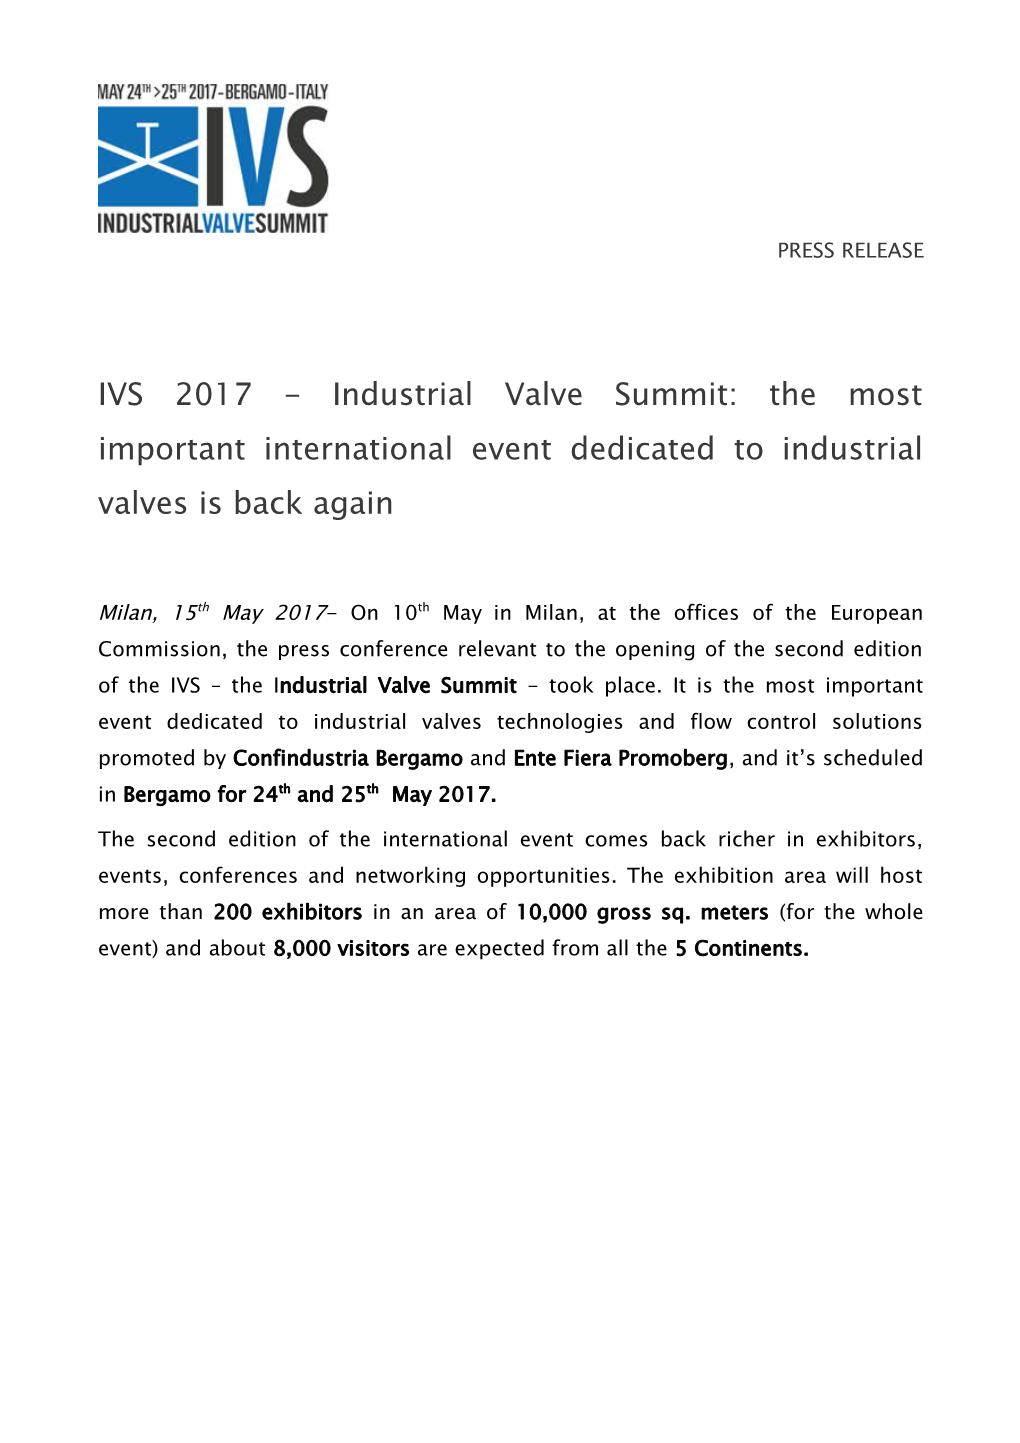 IVS 2017 - Industrial Valve Summit: the Most Important International Event Dedicated To